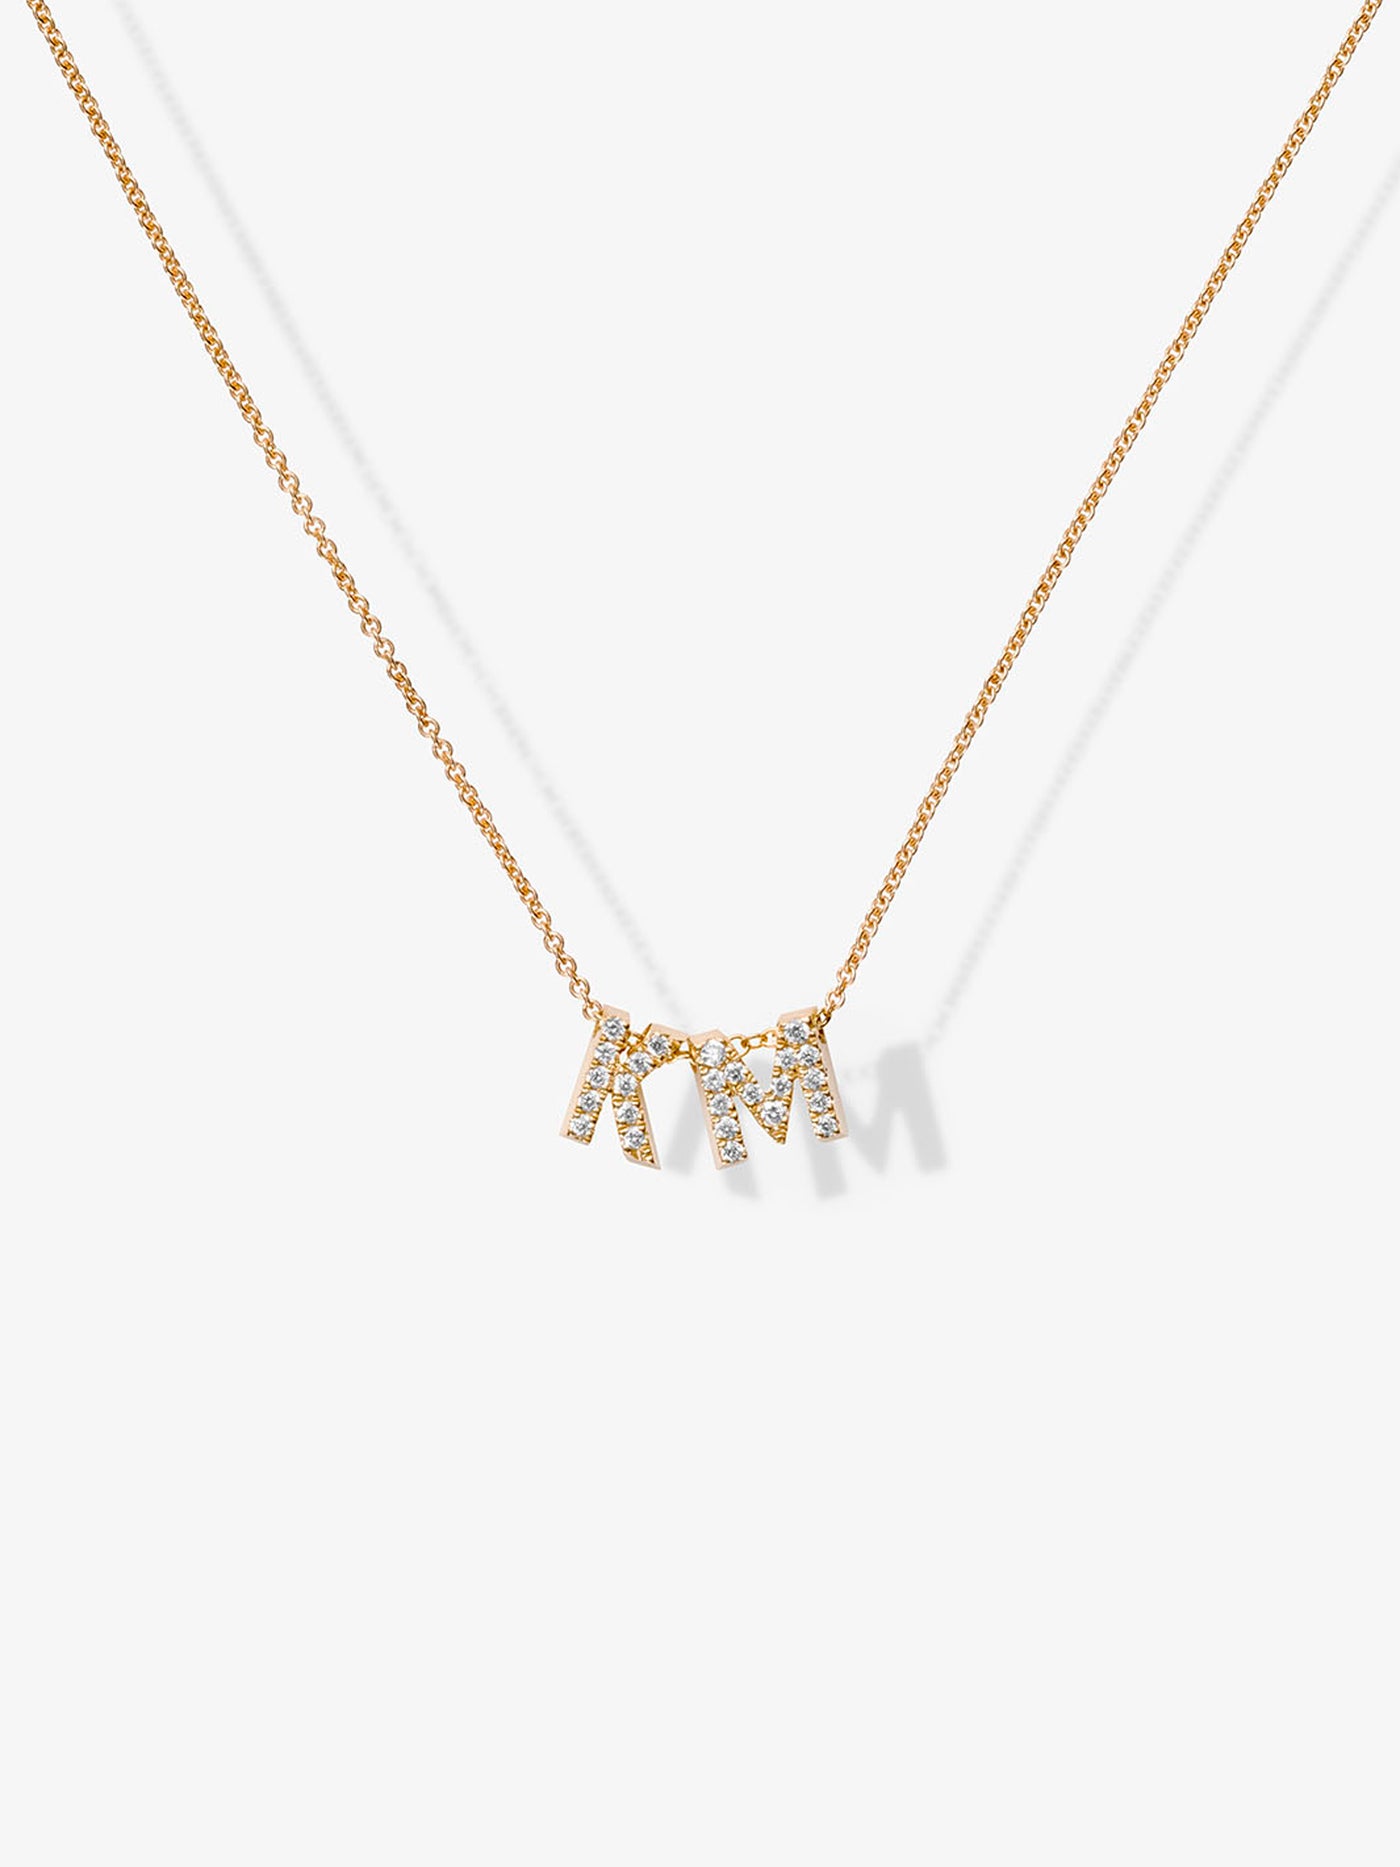 Two Letters Necklace in Diamonds and 18k Gold